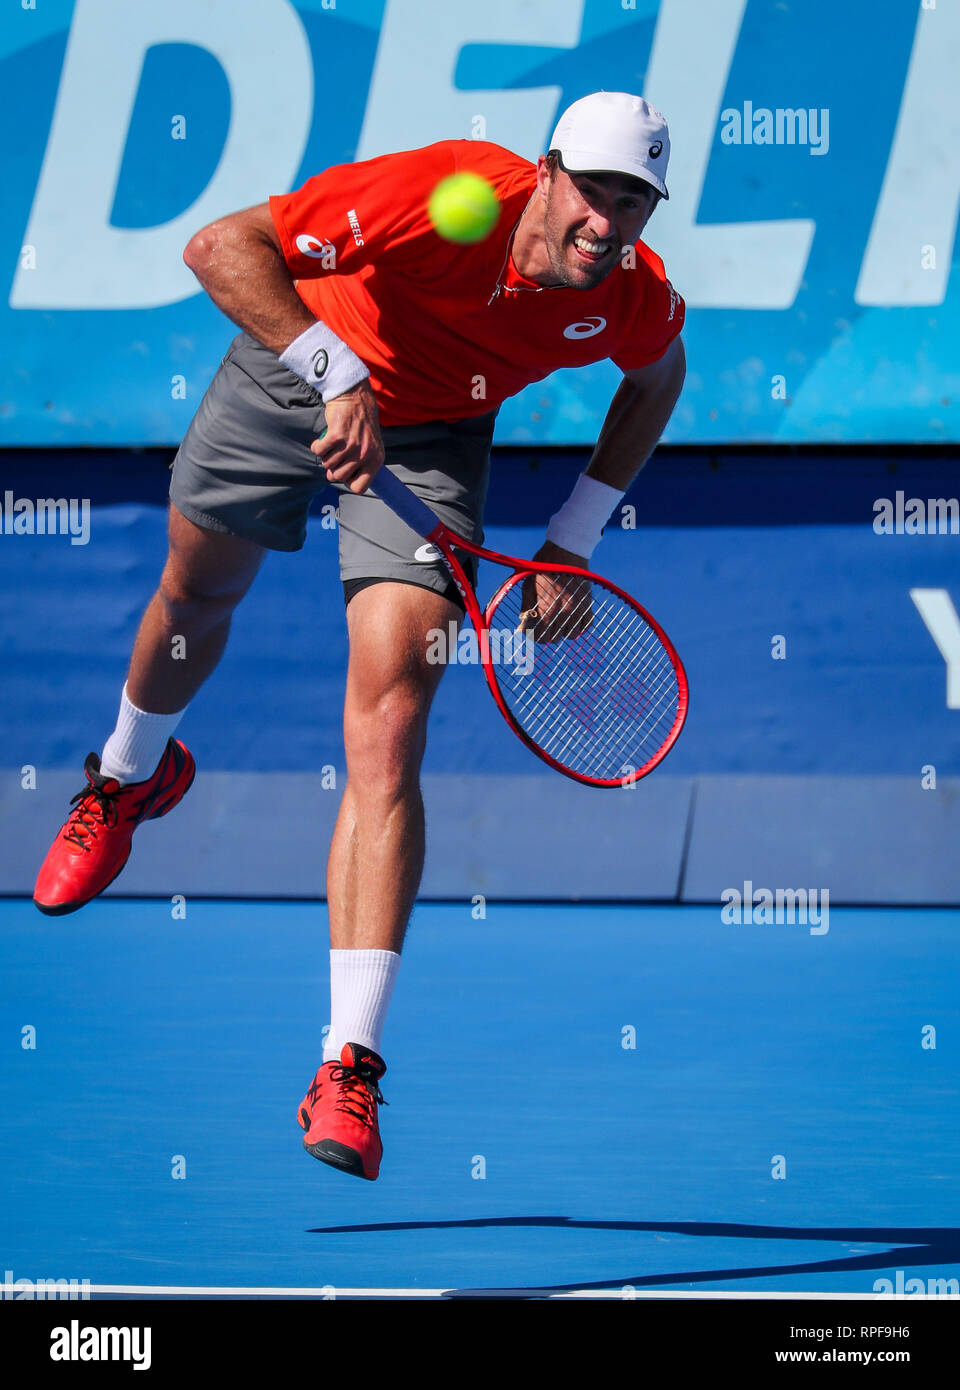 February 2l, 2019: Steve Johnson, of the United States, serves against  Paolo Lorenzi, of Italy, during a quarterfinal round of the 2019 Delray  Beach Open ATP professional tennis tournament, played at the